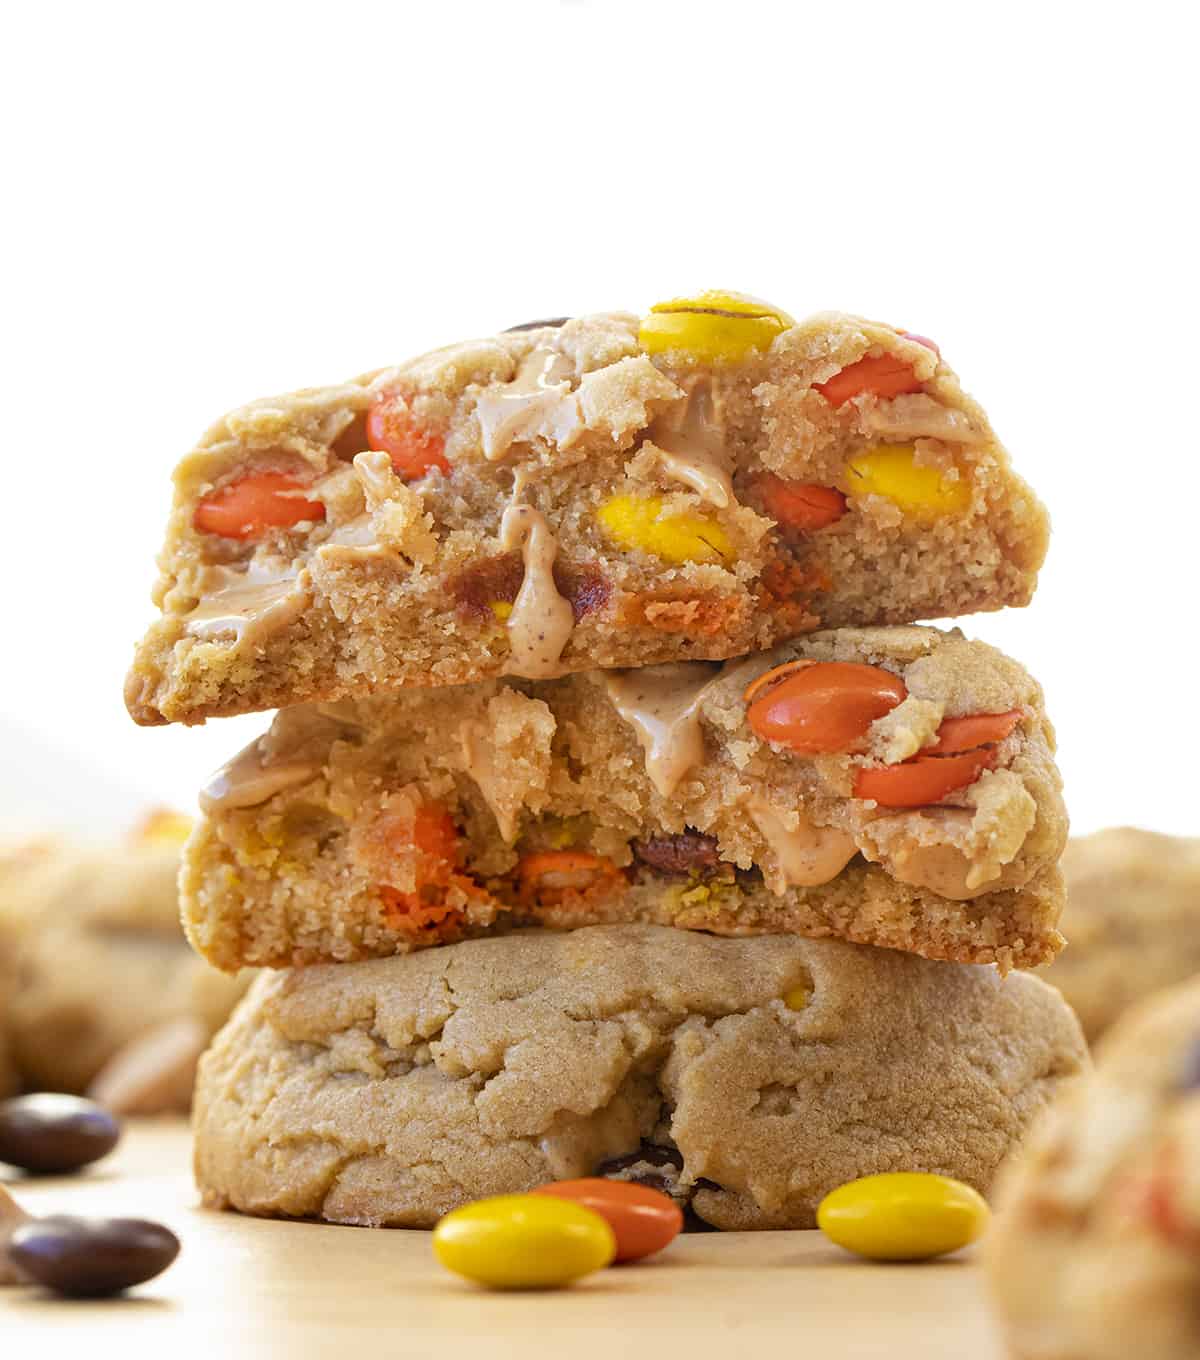 Stacked Reese's Pieces Peanut Butter Cookies and Top Cookie Broken in Half Showing Inside.